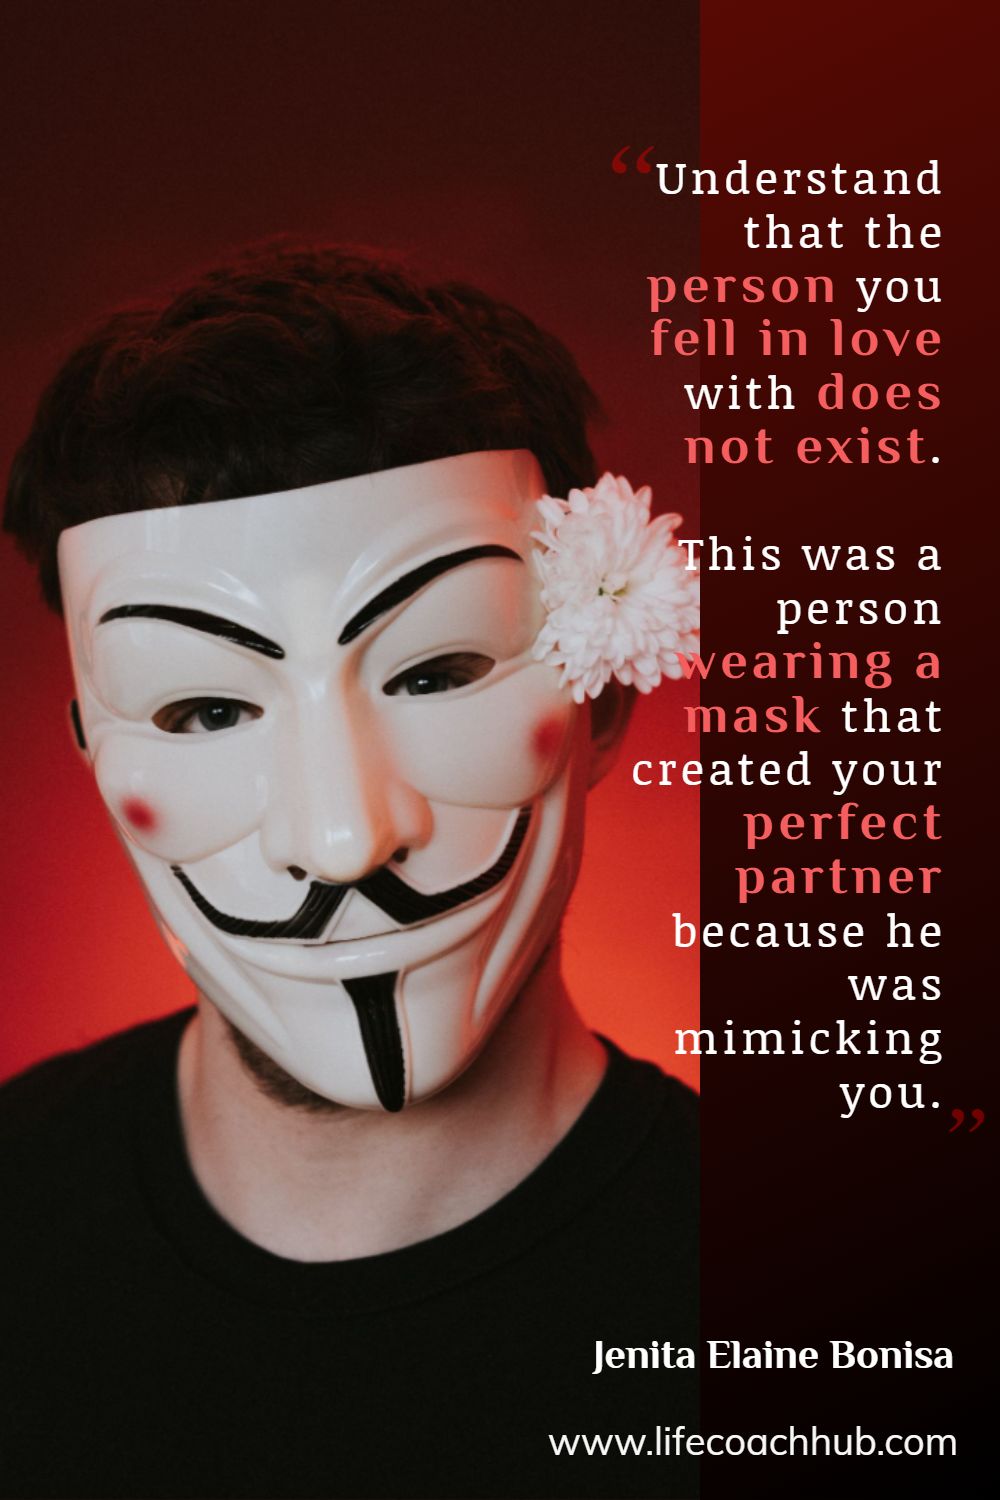 Understand that the person that you fell in love with does not exist. This was a person wearing a mask that created your perfect partner because he was mimicking you. Jenita Elaine Bonisa Coaching Quote